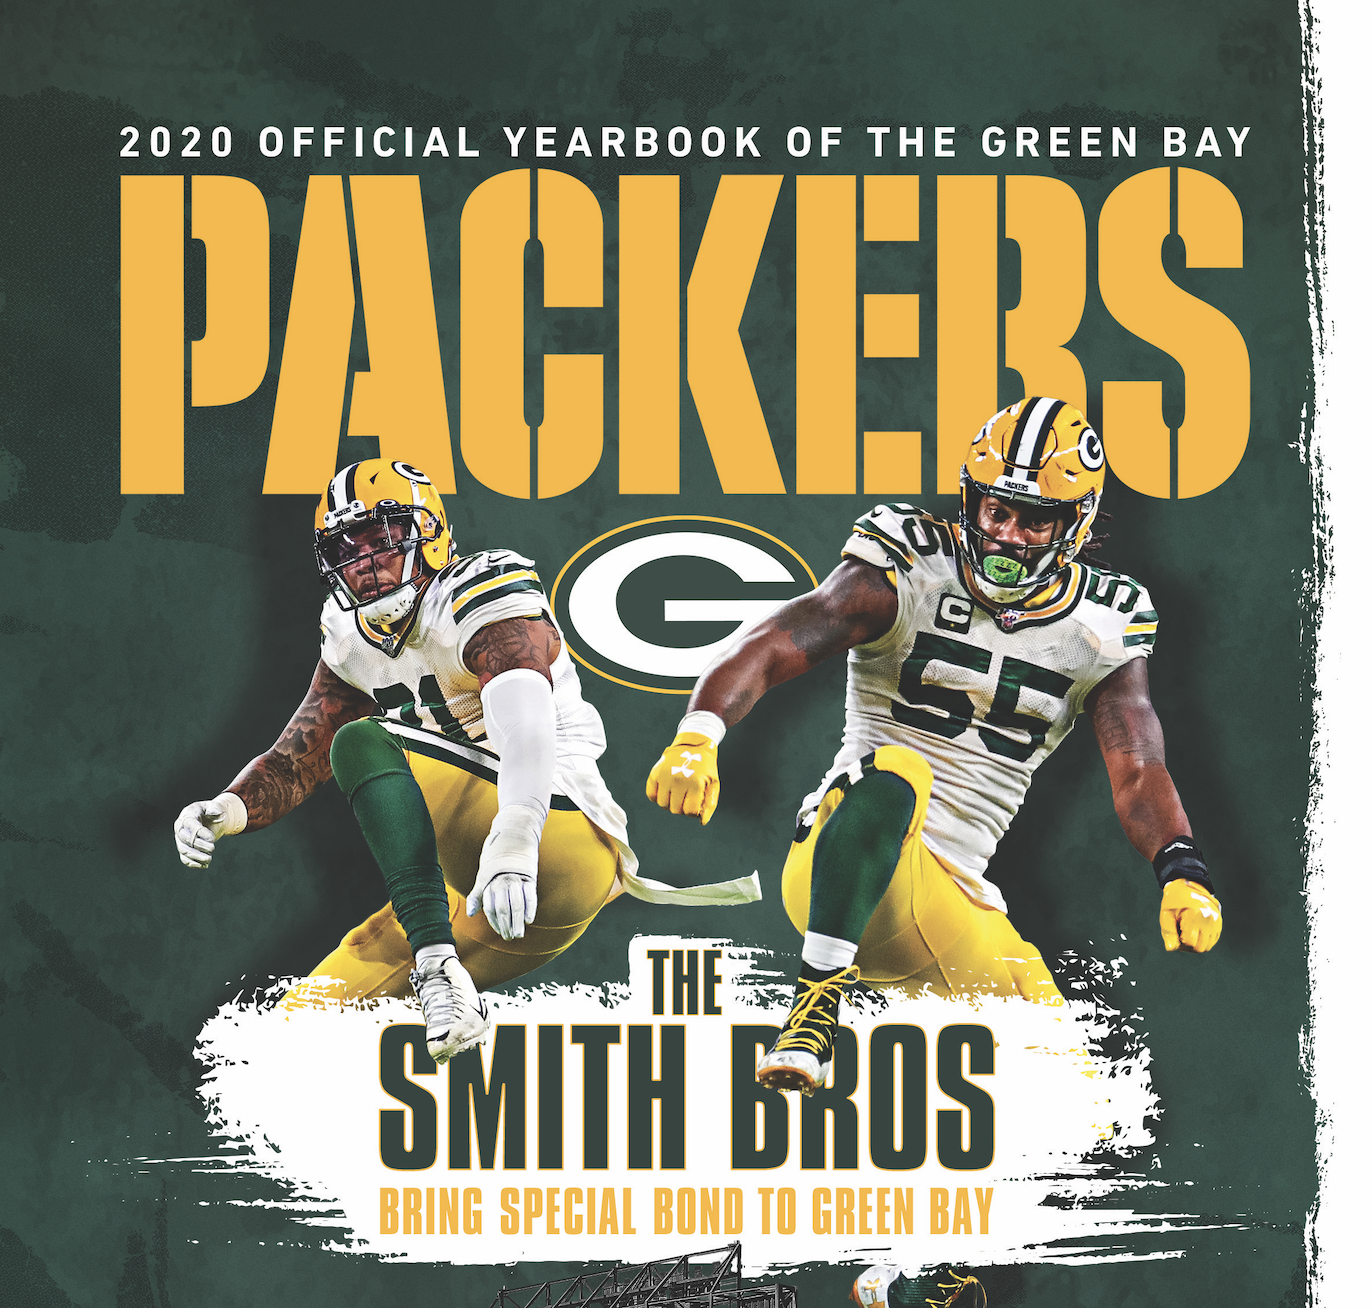 Get the official Green Bay Packers yearbook from CHTV!